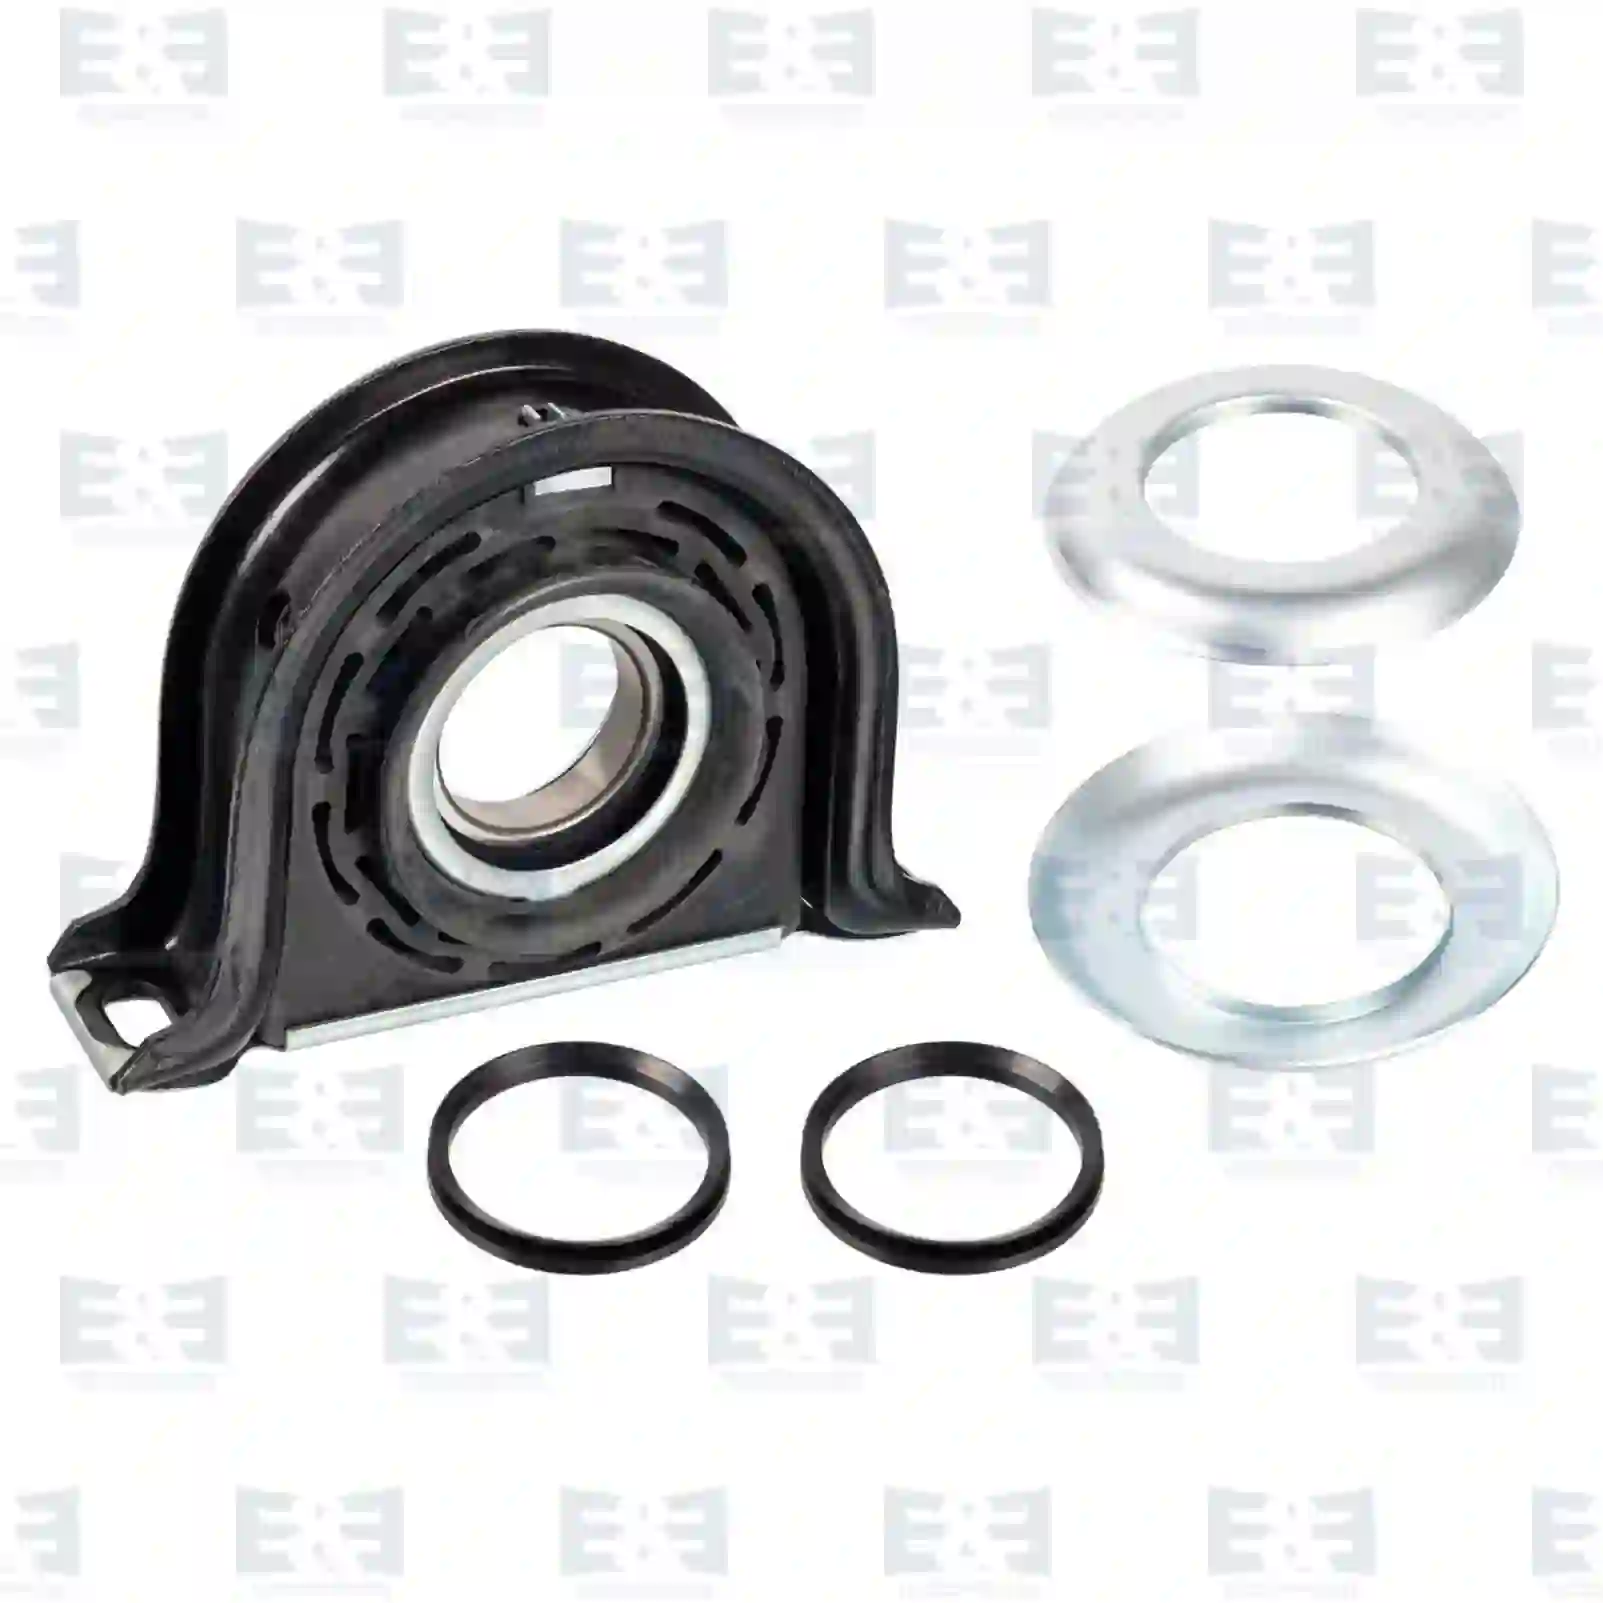 Support Bearing Center bearing, EE No 2E2276896 ,  oem no:1068208, 20471422, ZG02475-0008 E&E Truck Spare Parts | Truck Spare Parts, Auotomotive Spare Parts